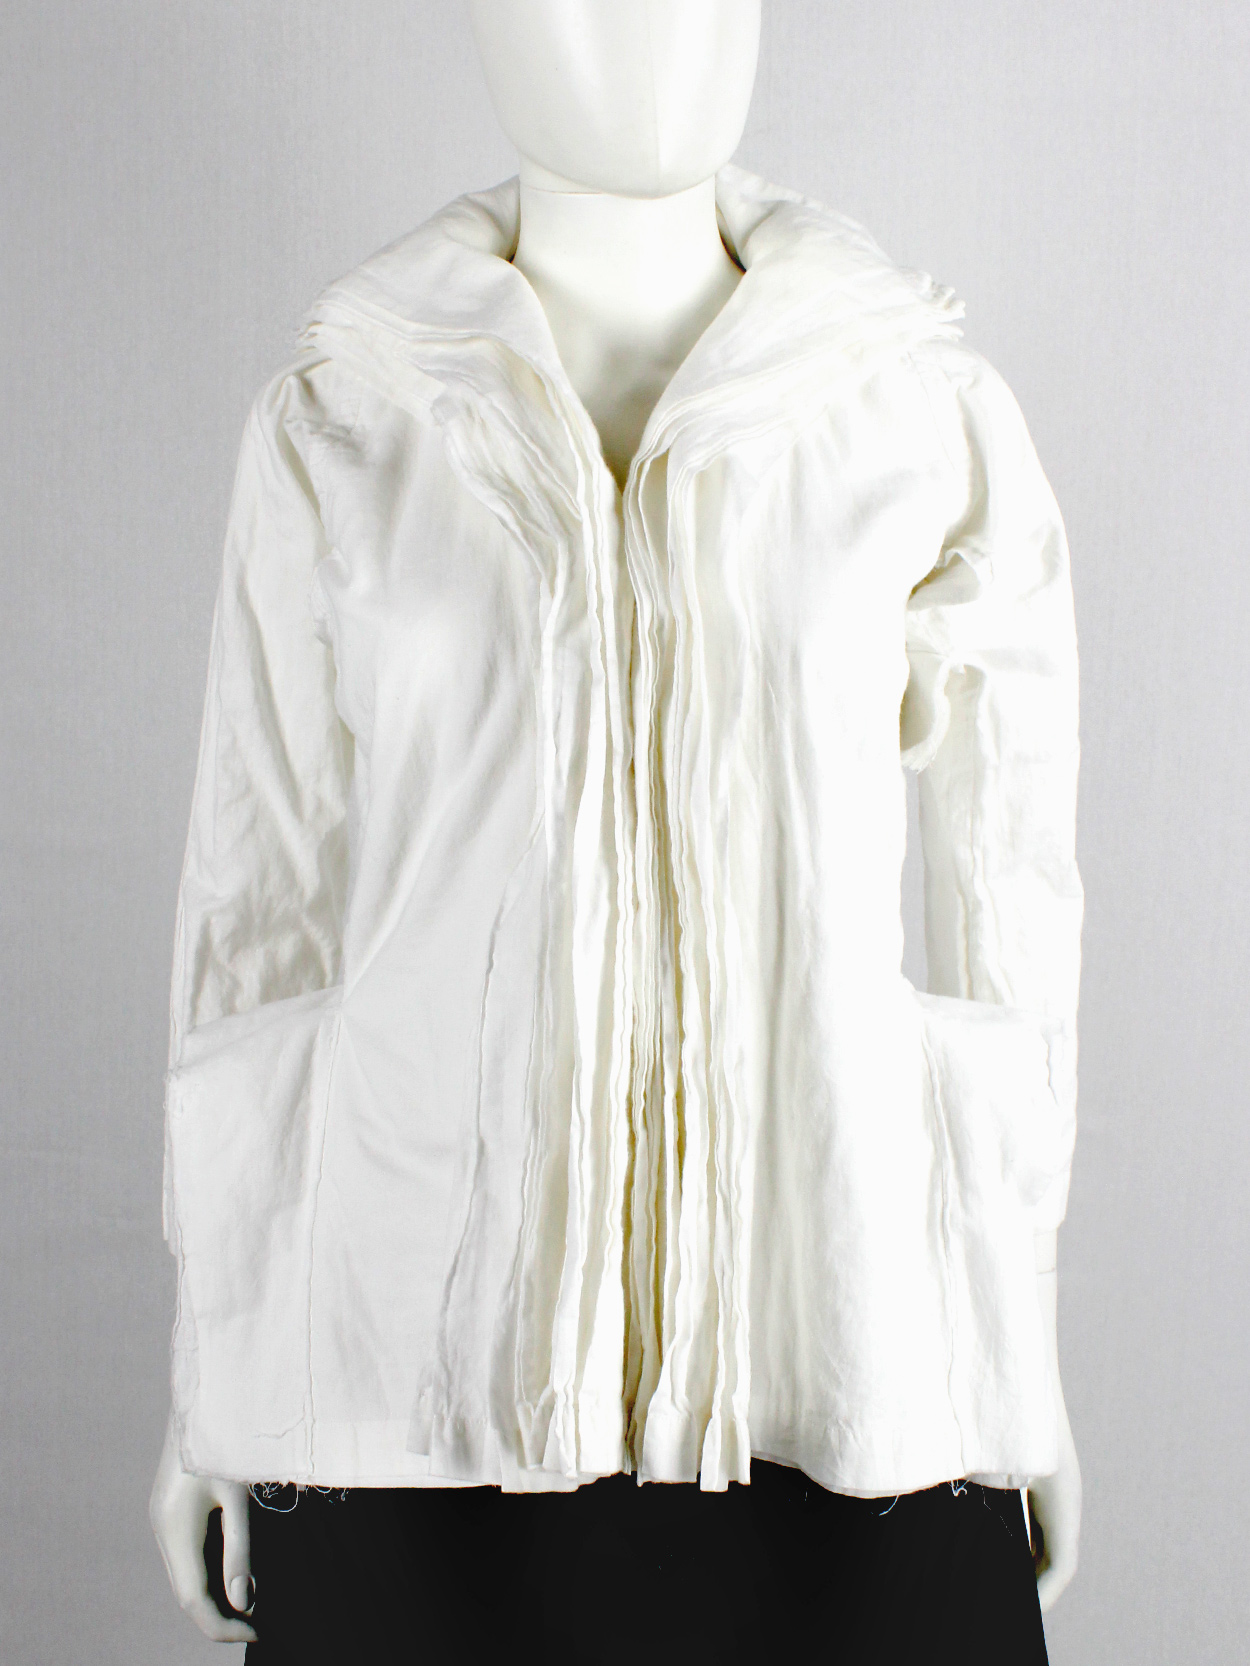 Junya Watanabe white blazer made of 8 blazers layered over each other spring 2005 (13)